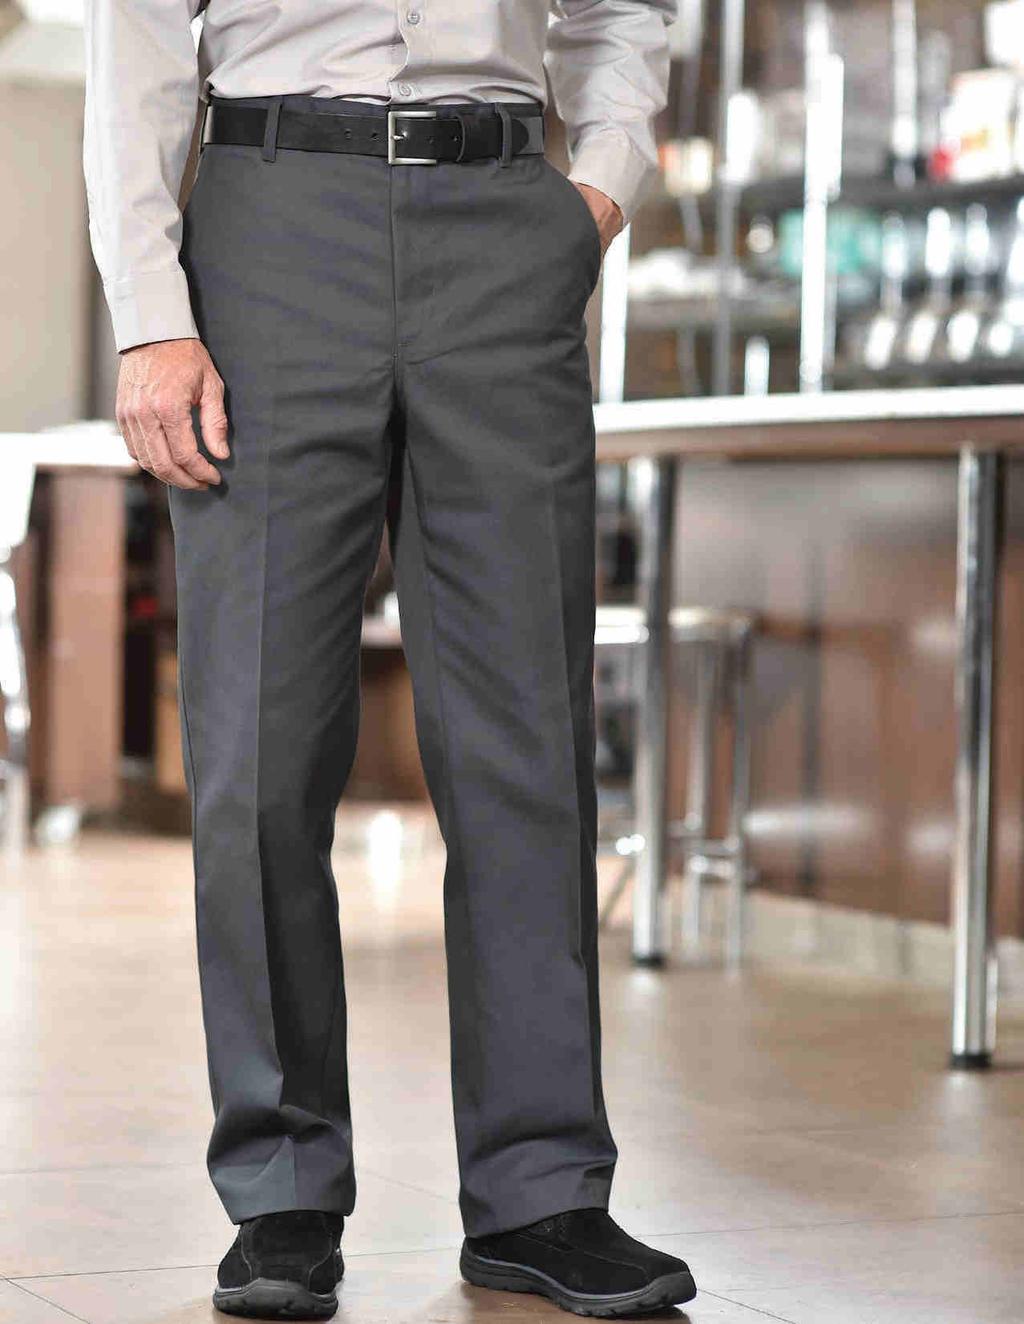 WORK PANTS 100% Cotton Work Pants - dome Closure Fashioned from 100% cotton, this heavyweight yet highly comfortable style also features a secure dome closure and unfinished bottoms for custom